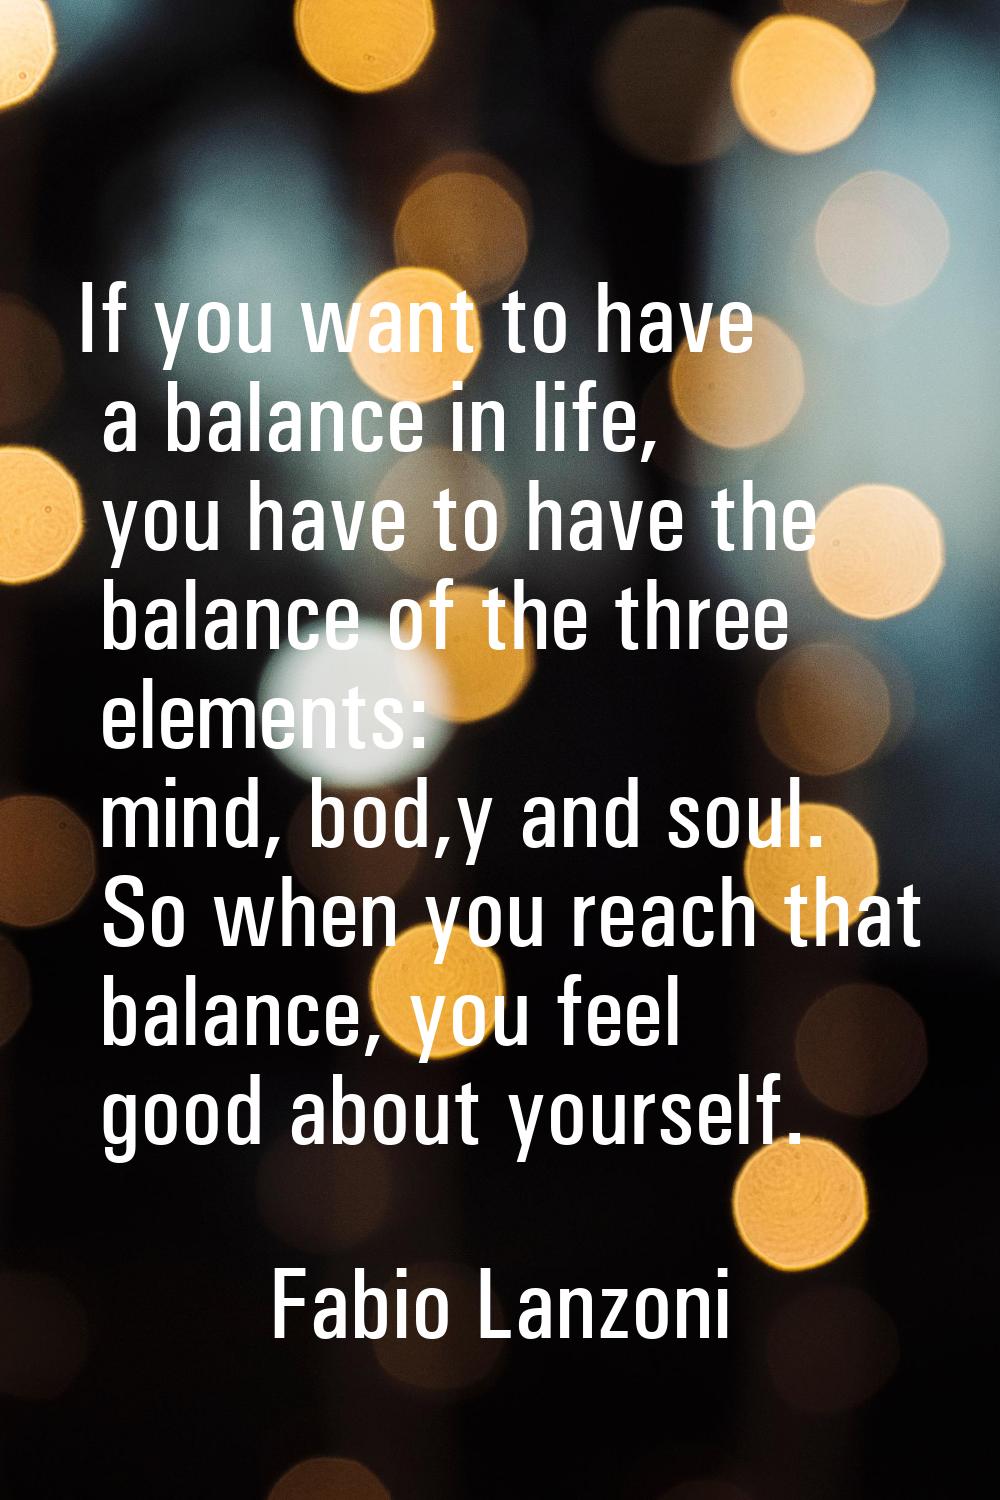 If you want to have a balance in life, you have to have the balance of the three elements: mind, bo